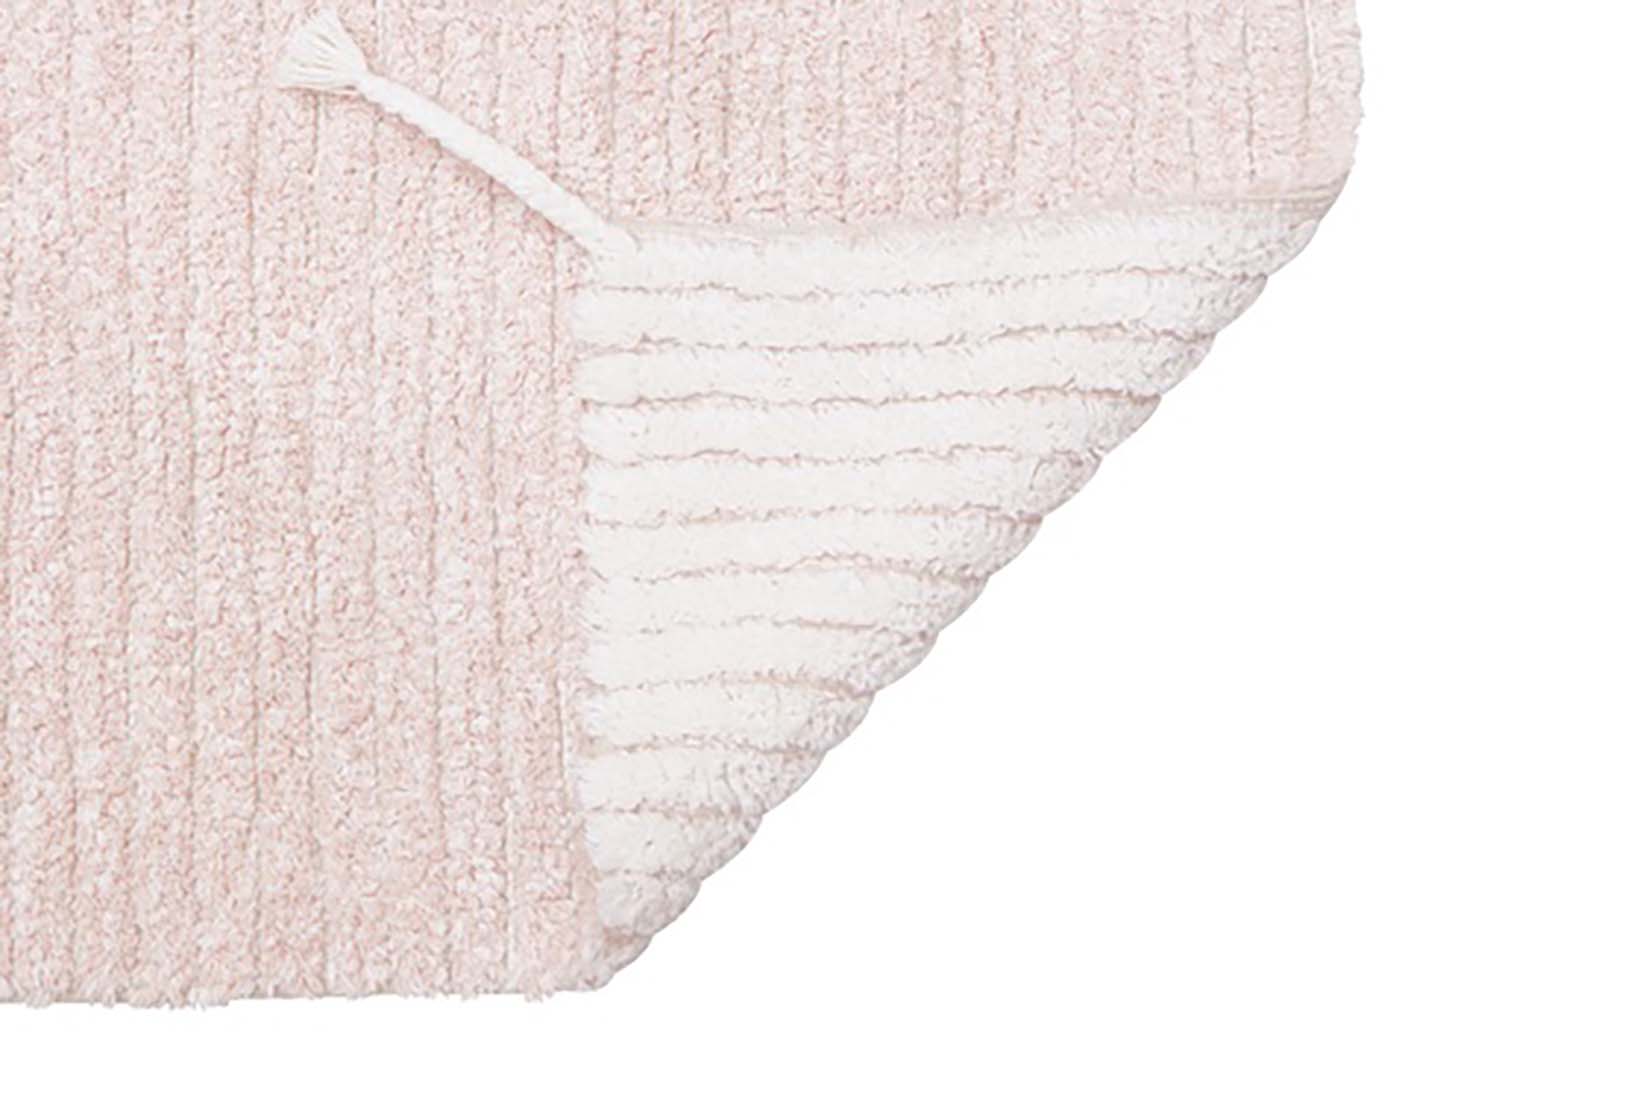 reversible textured rug in pink and ivory with ombre design
